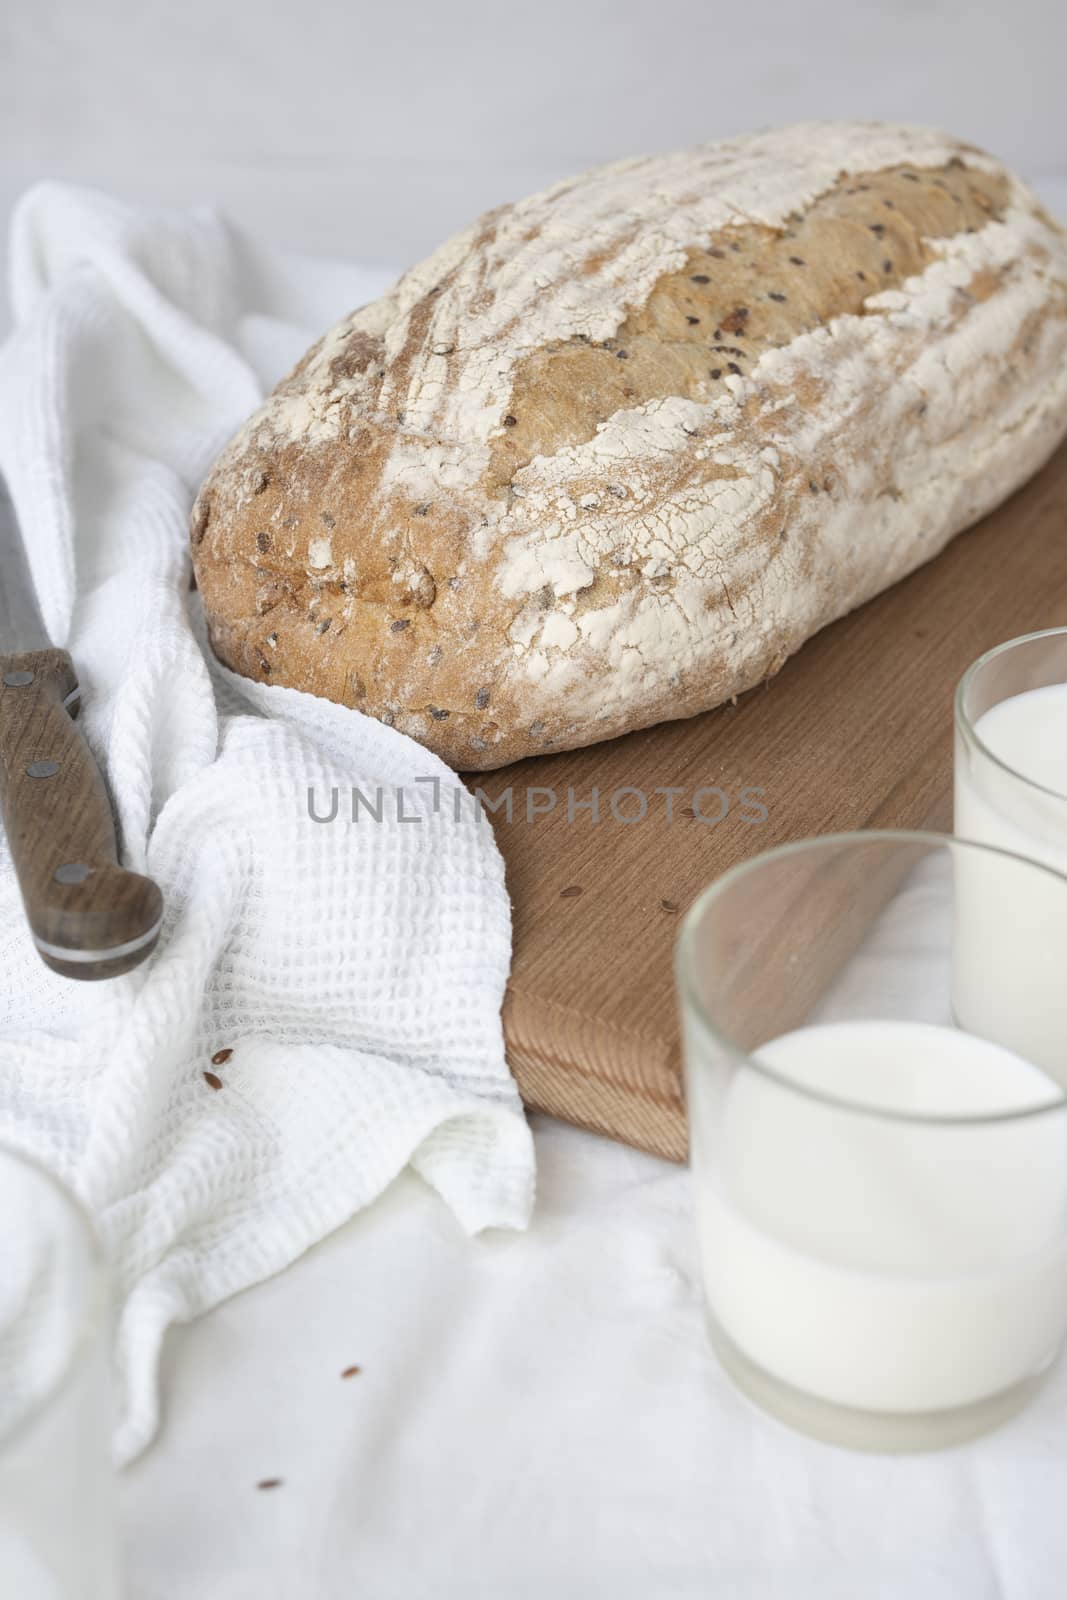 Wheat bread, a jug of milk and bread with sesame seeds by sashokddt